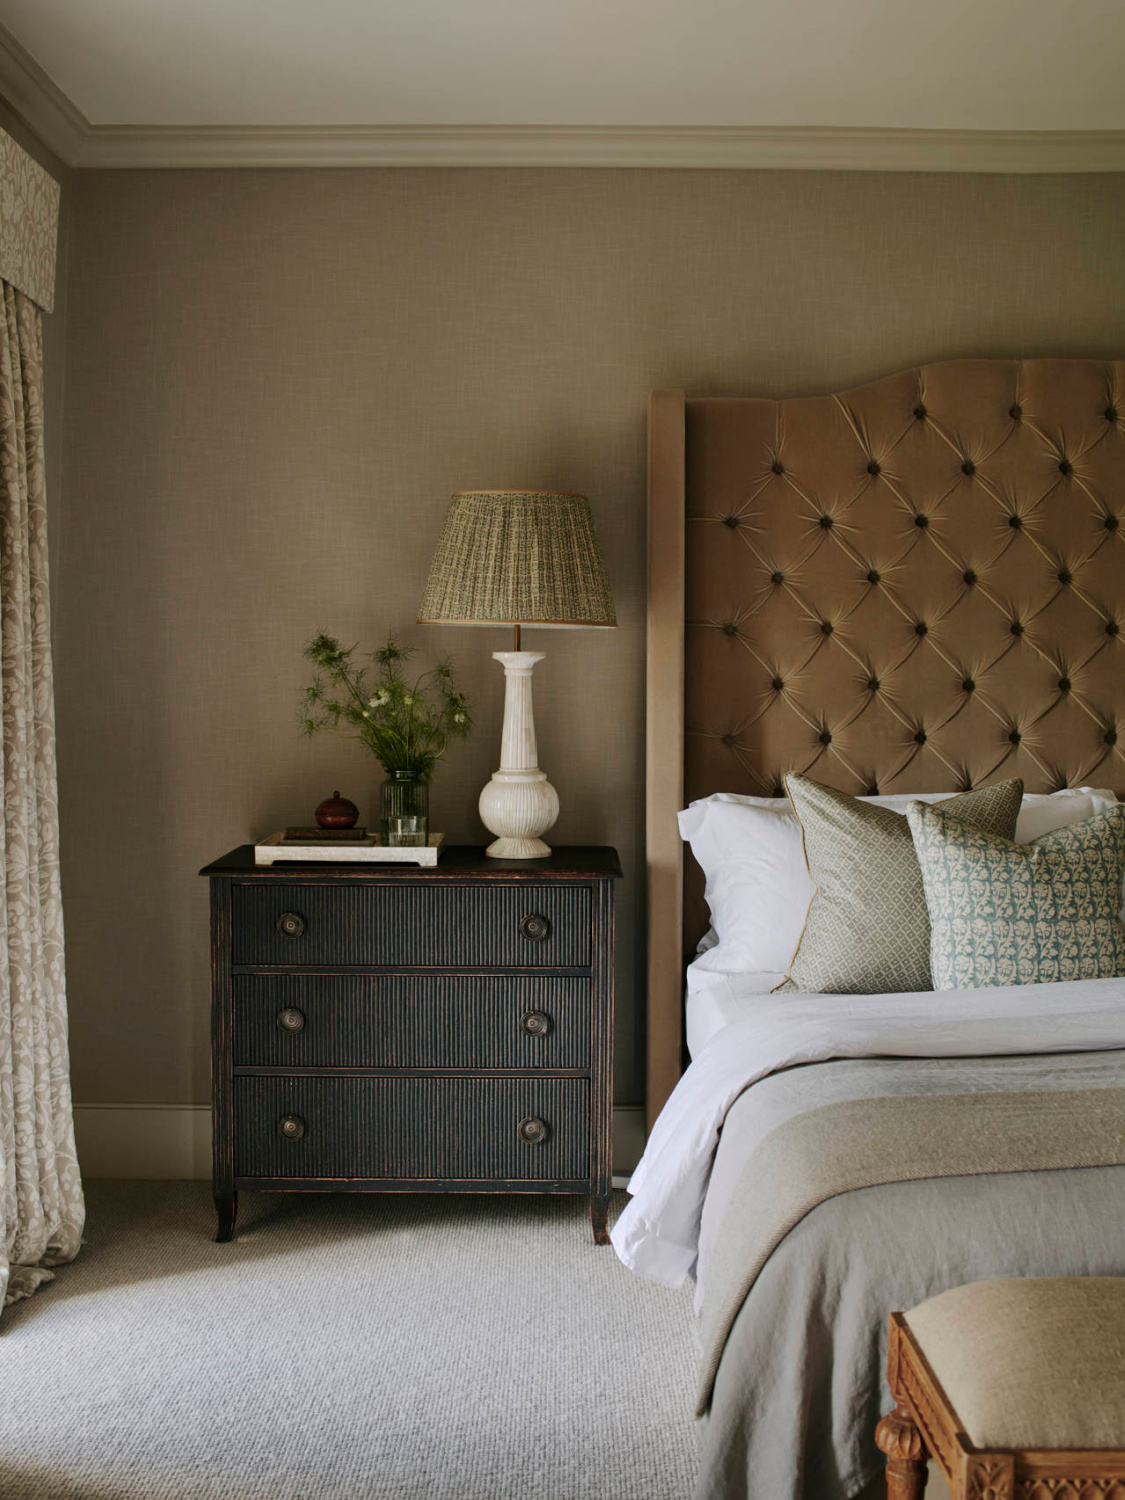 Sims Hiditch - an elegant bedroom with tufted velvet headboard in a lovely Cotswold family manor home. #englishcountry #elegantbedrooms #romanticbedrooms #europeancountry